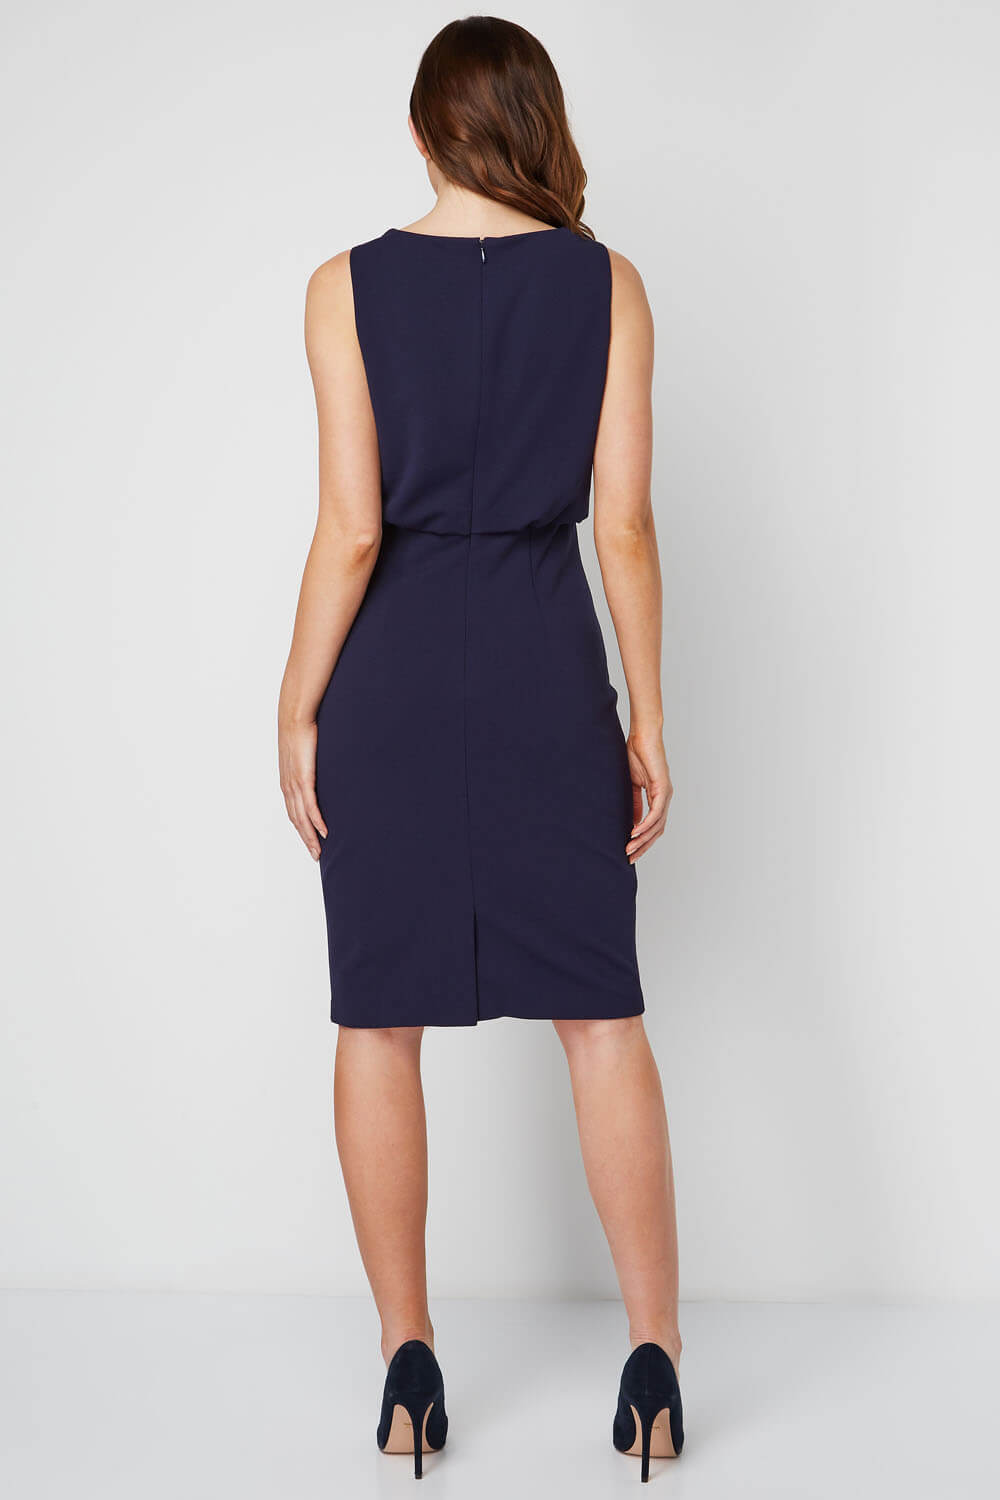 Navy  Cowl Neck Fitted Dress, Image 3 of 5